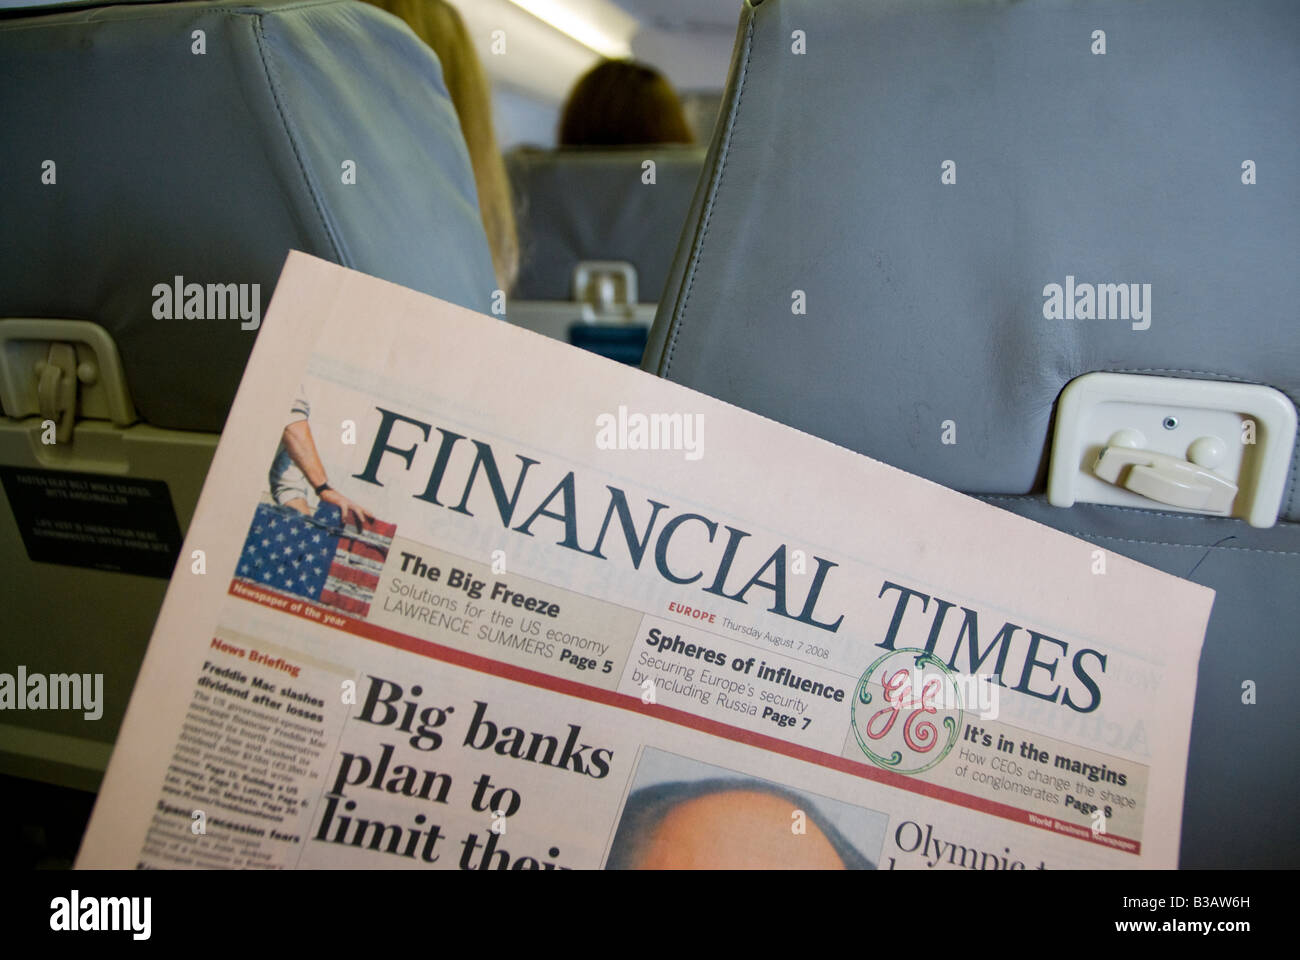 Financial Times newspaper on a plane Stock Photo